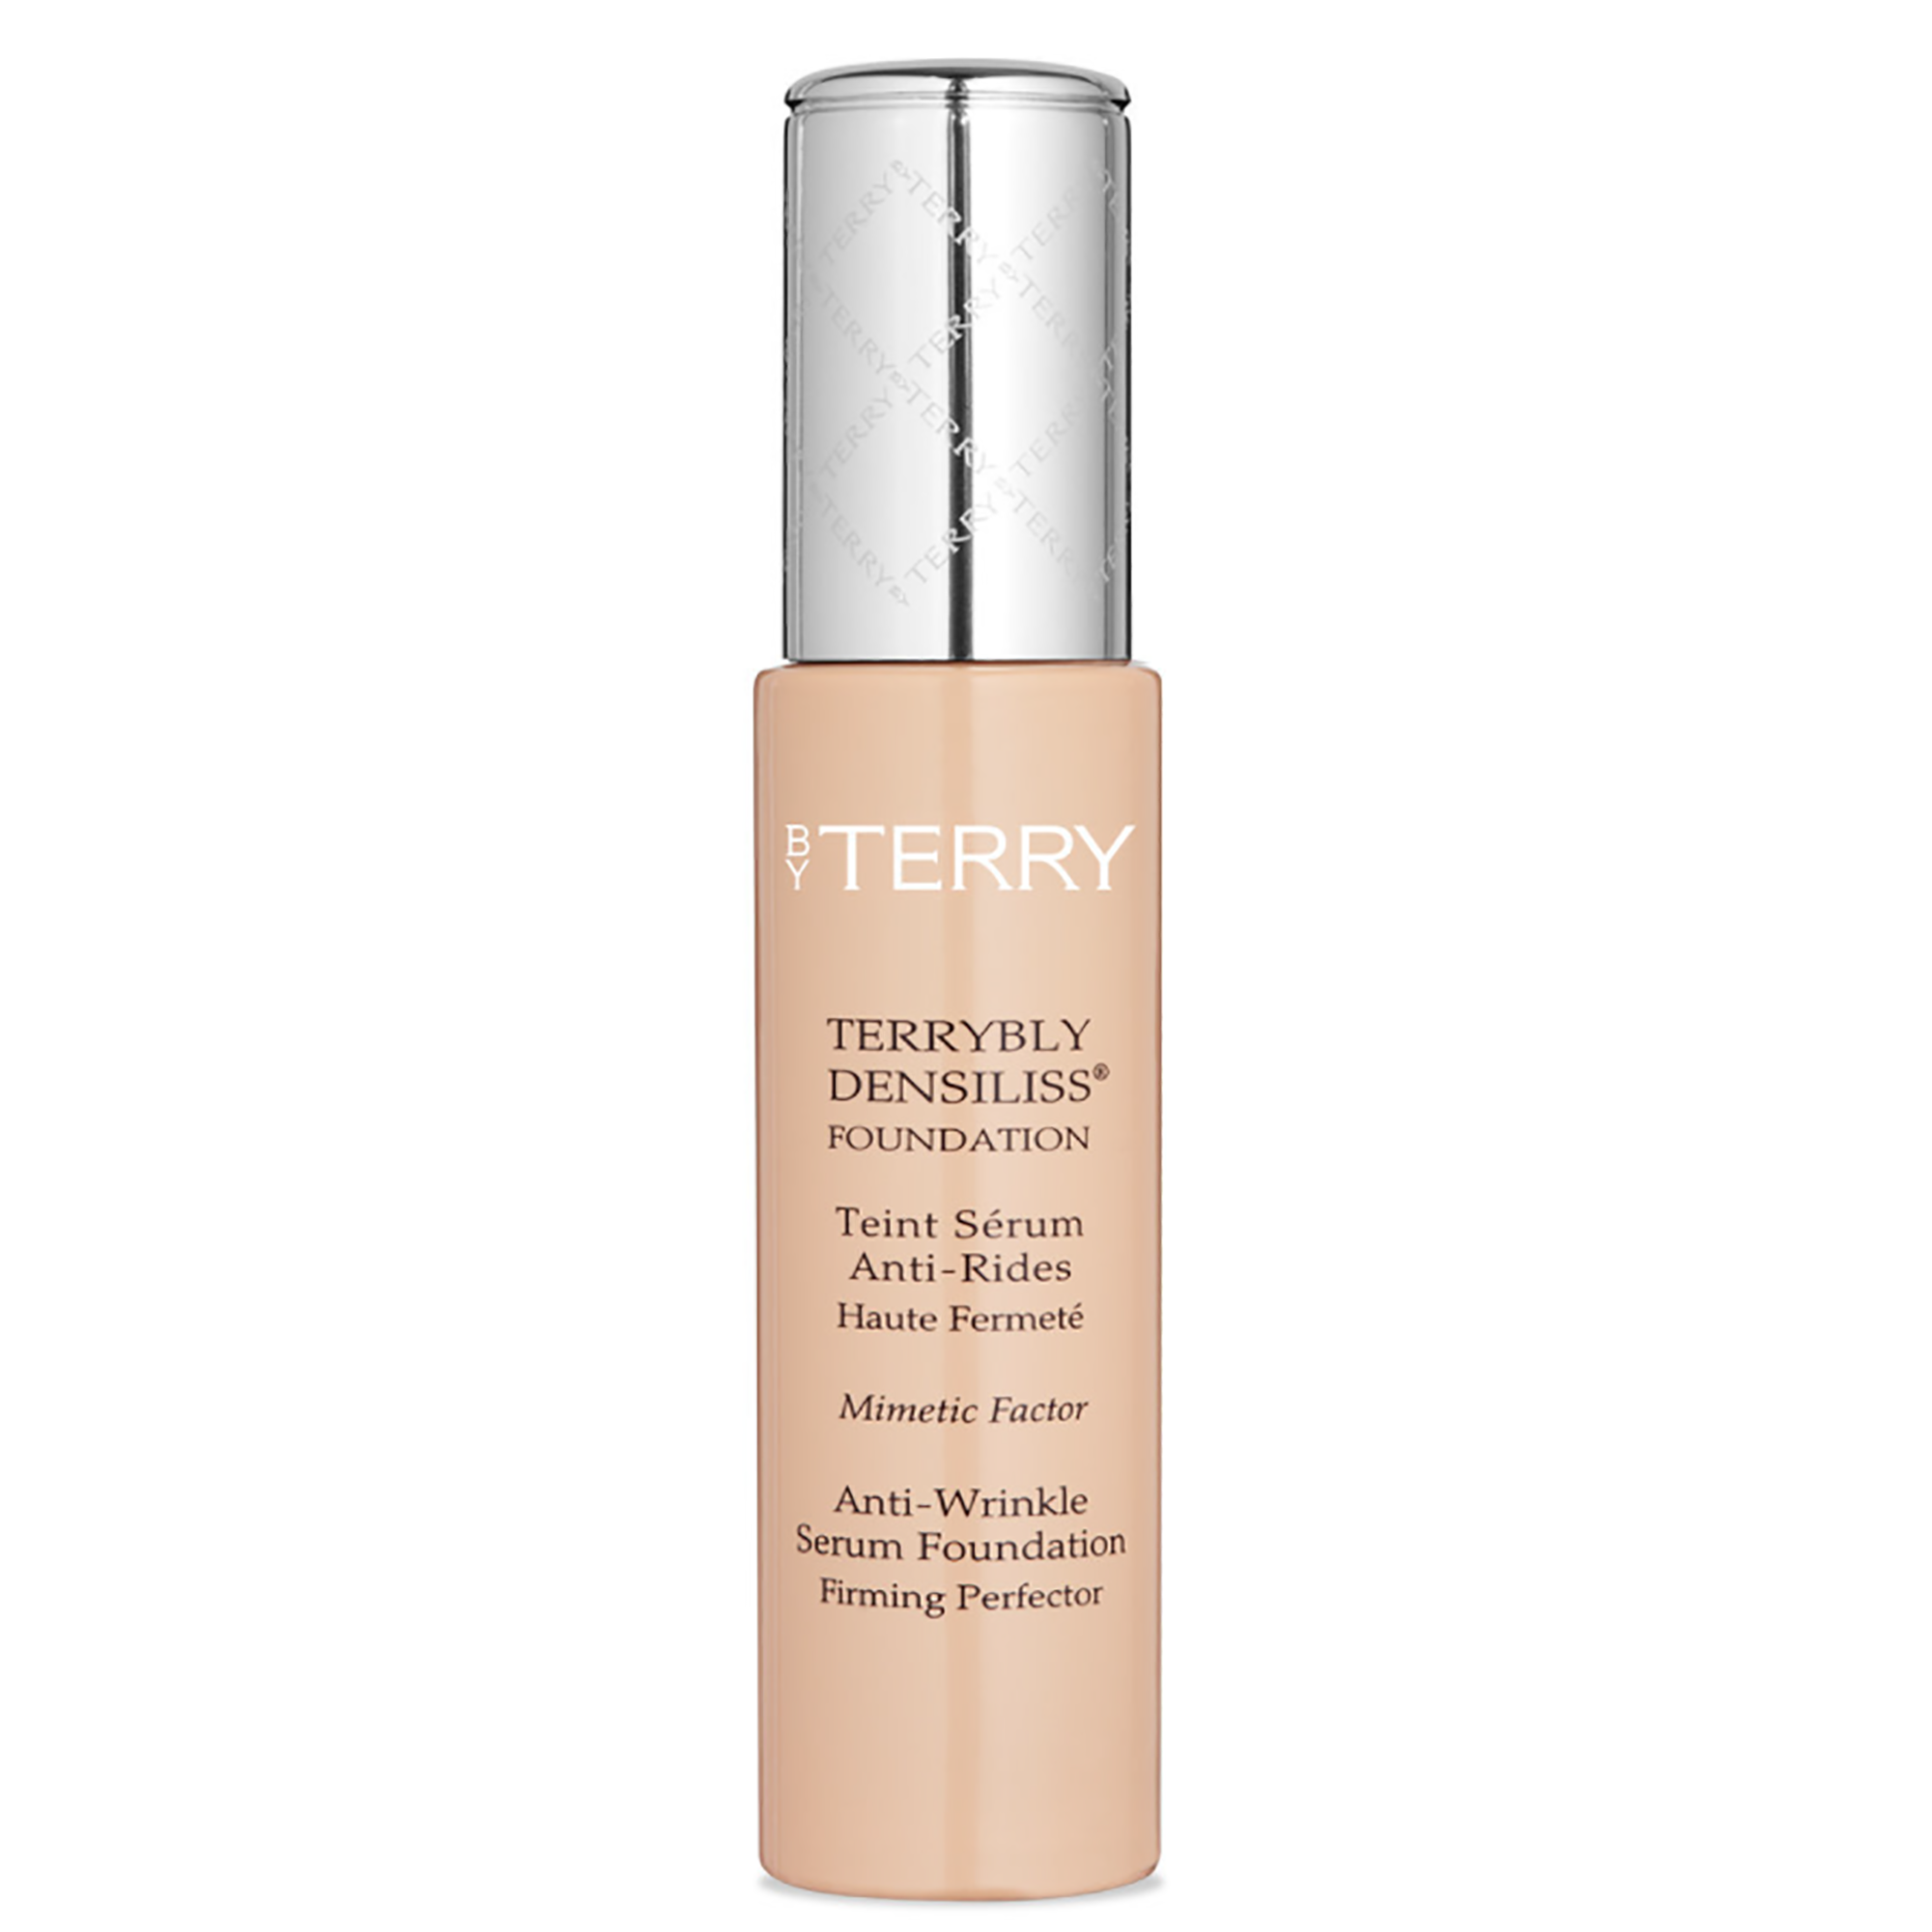 By Terry Terrybly Densiliss Anti-Wrinkle Serum Foundation #3 Vanilla Beige